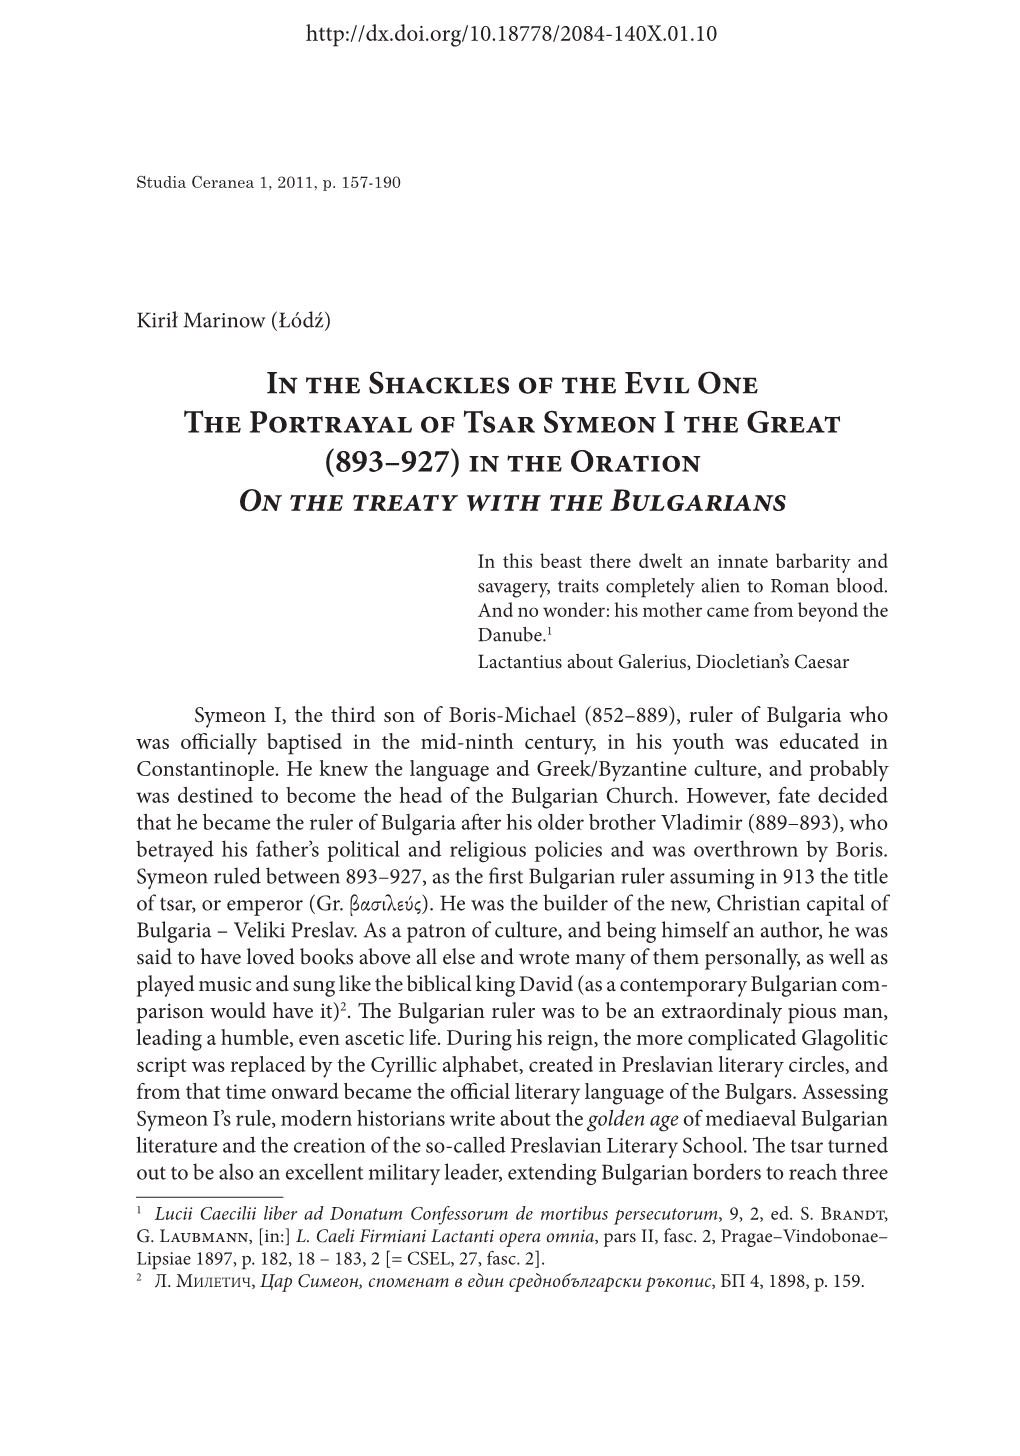 The Portrayal of Tsar Symeon I the Great (893–927) in the Oration on the Treaty with the Bulgarians